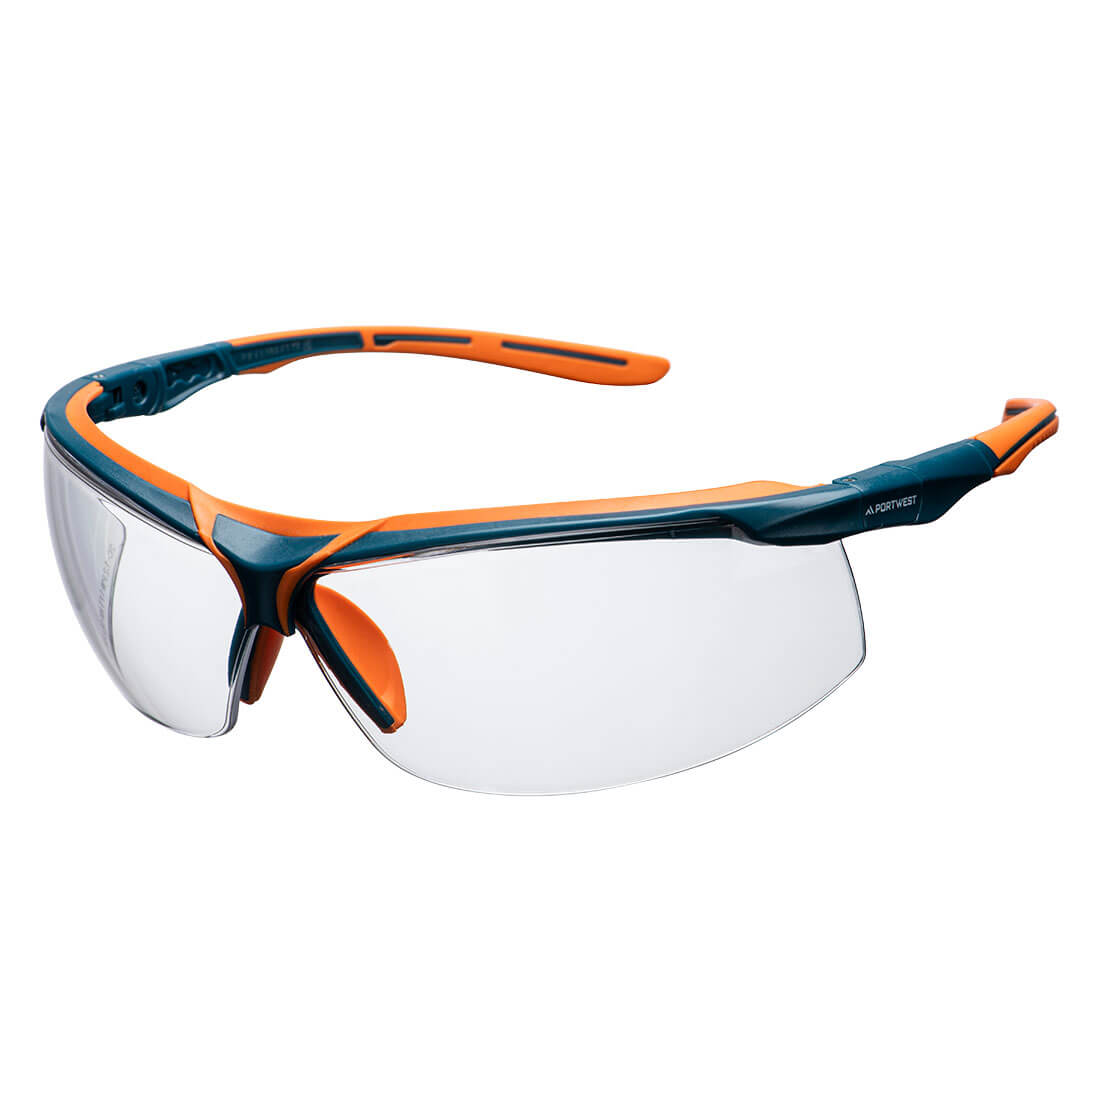 PS13 Mega KN Safety Glasses - Clear